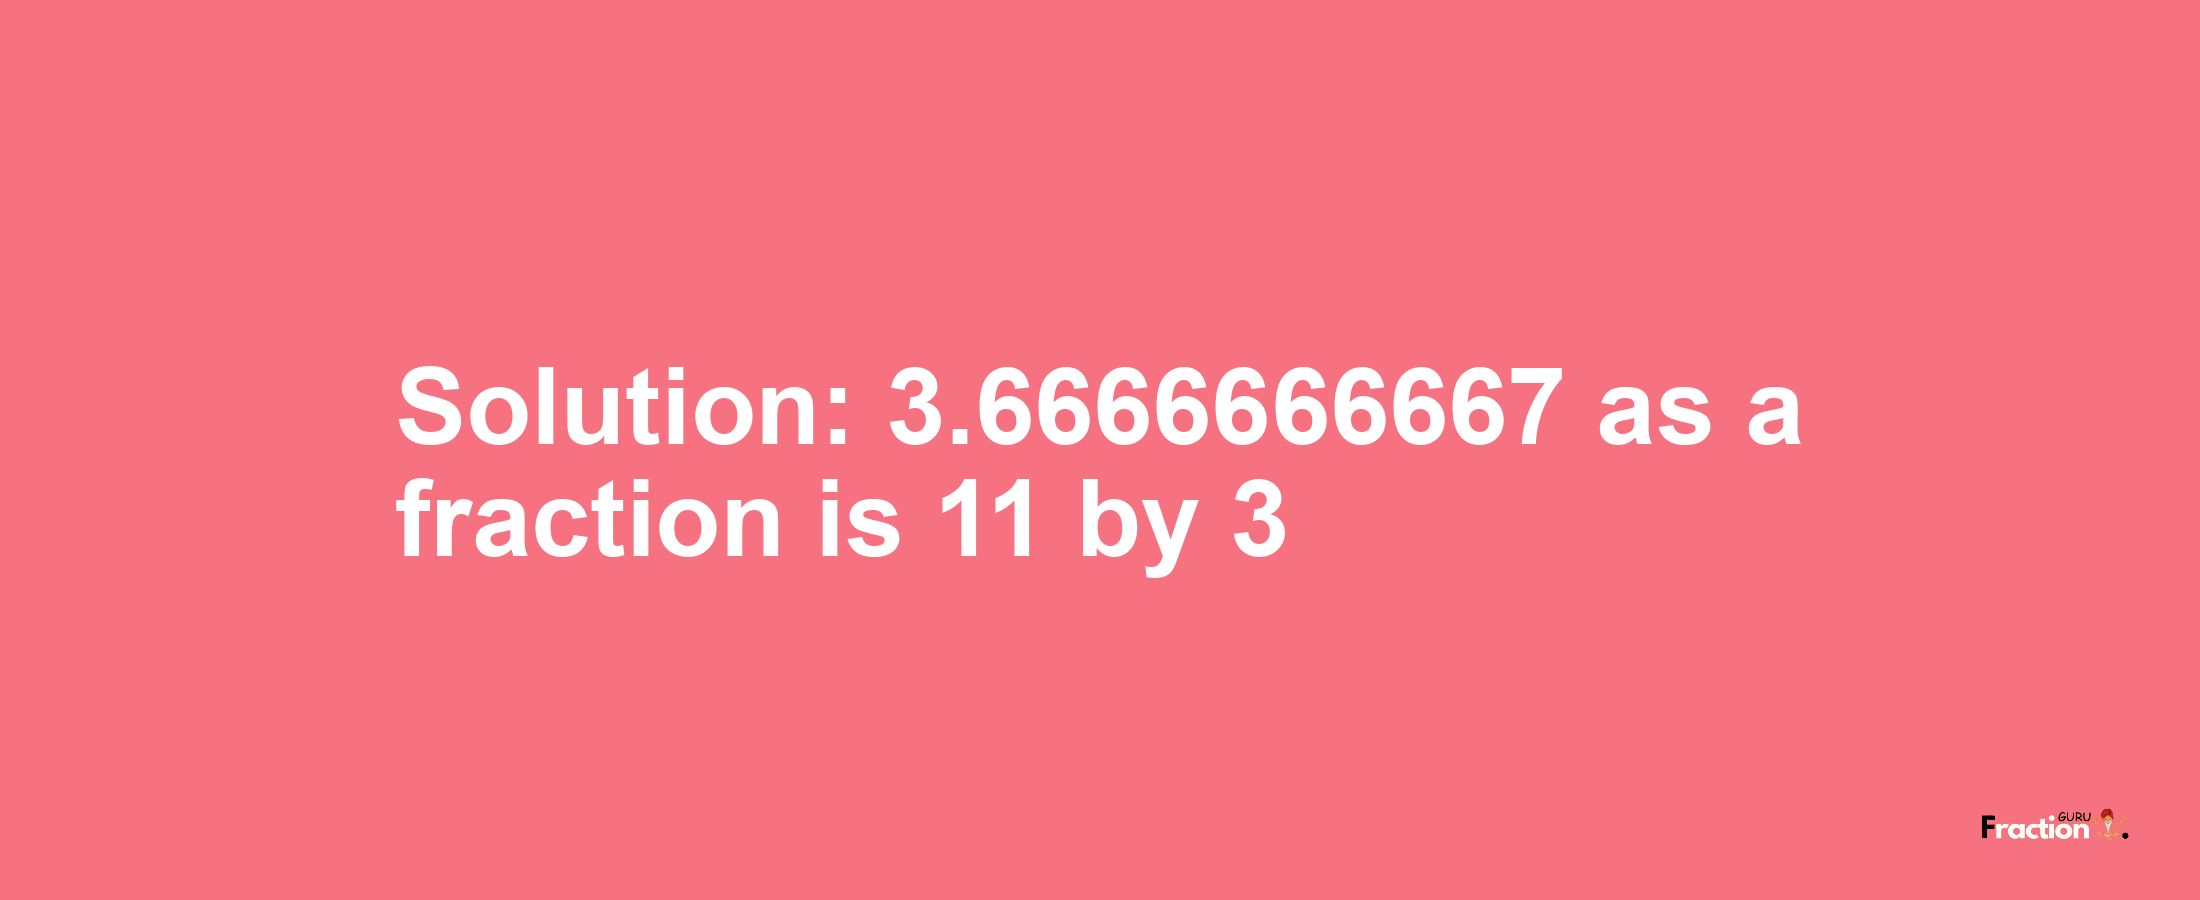 Solution:3.6666666667 as a fraction is 11/3